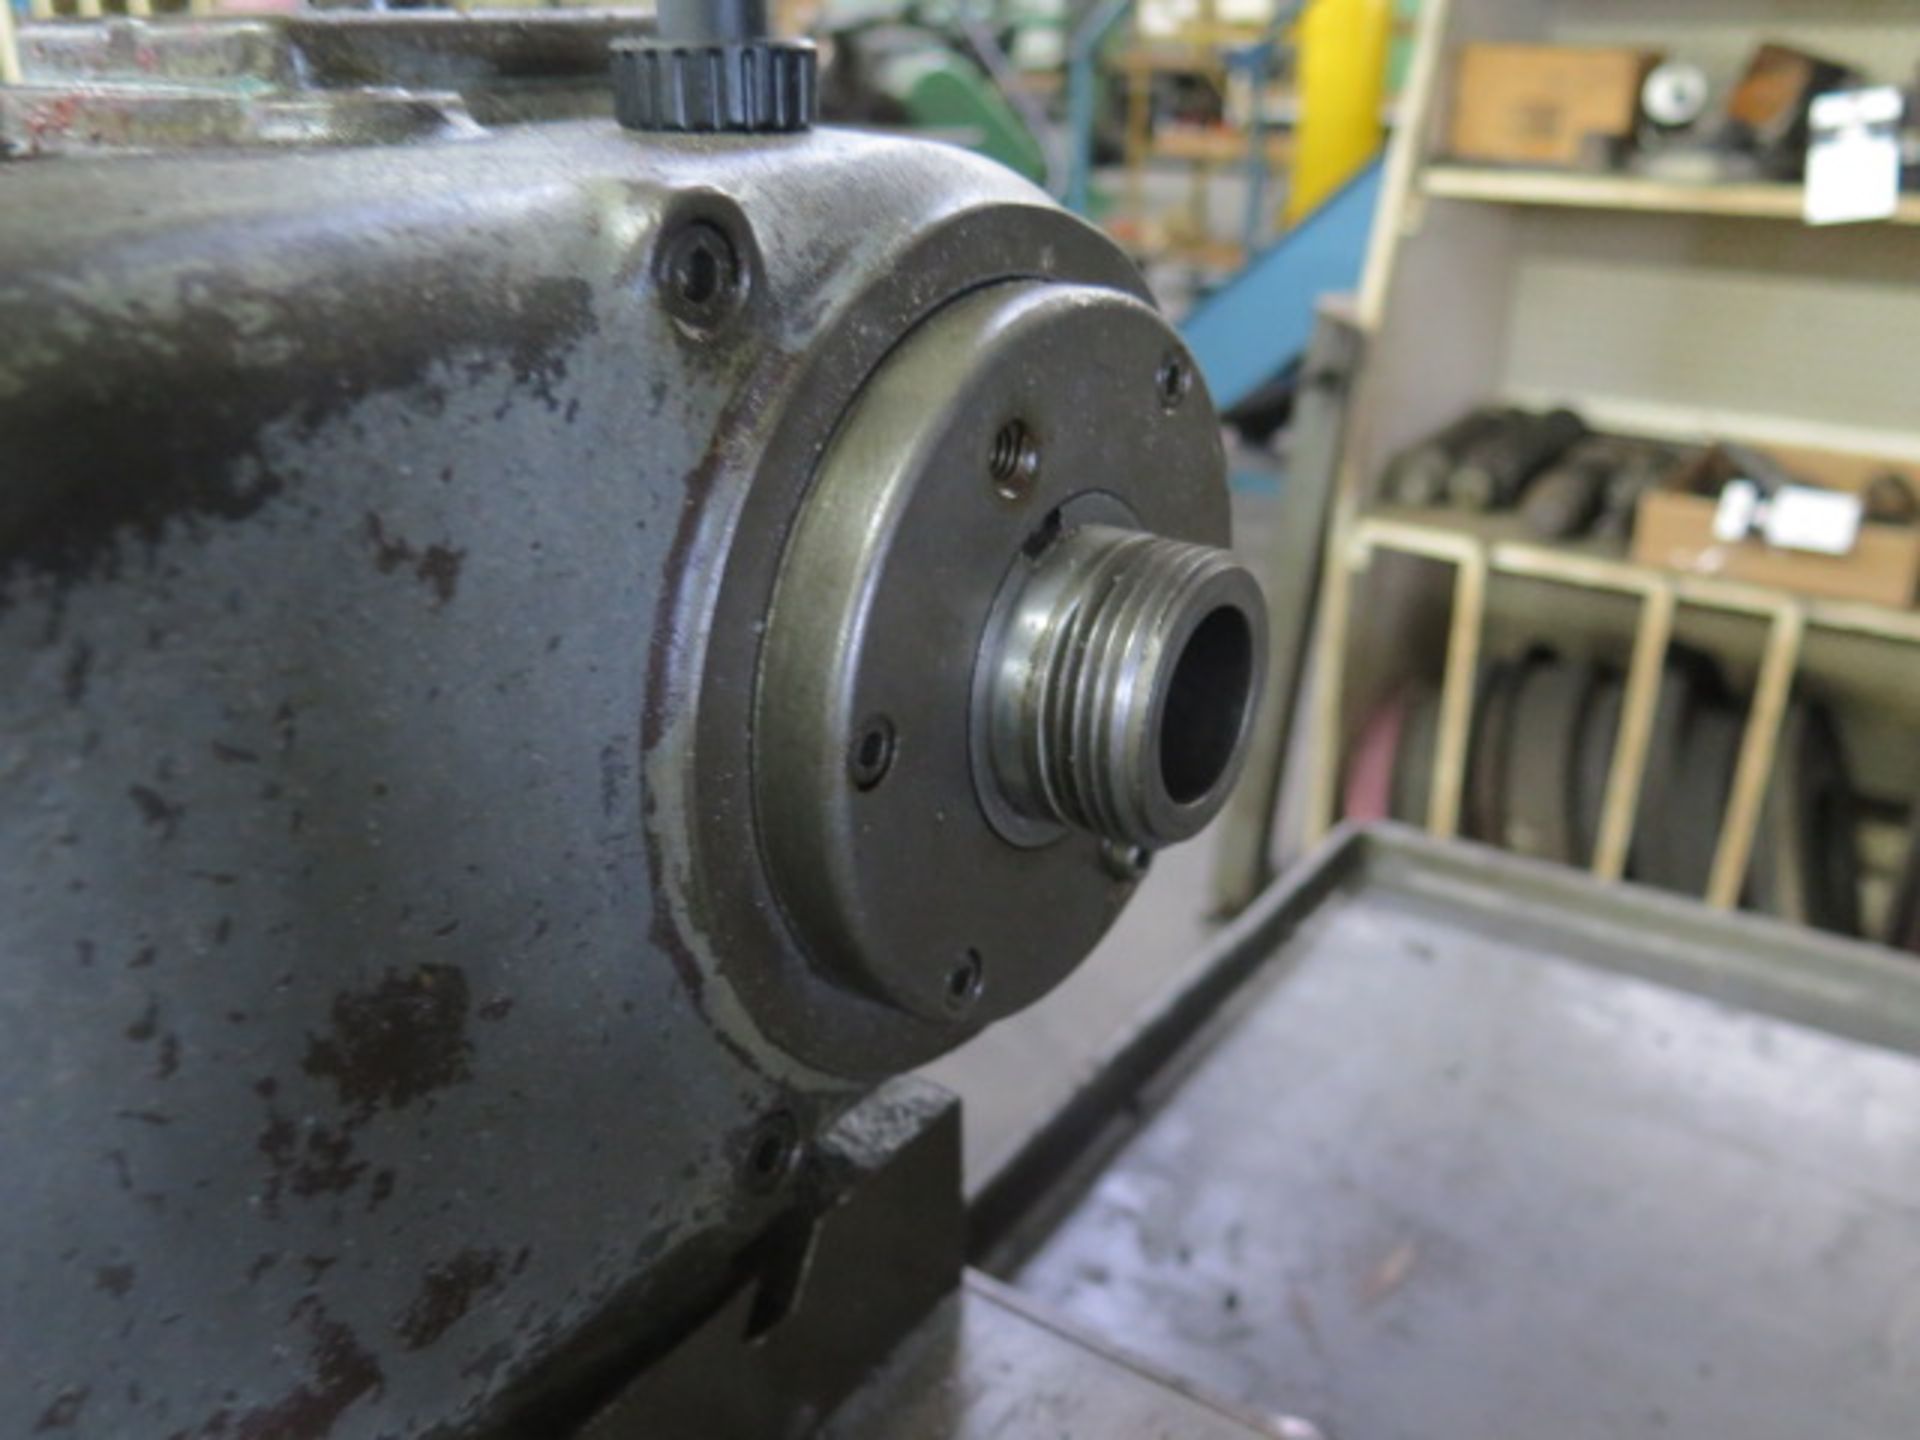 H. Tschudin HTG-600 Cylindrical Grinder s/n 64171 w/ Motorized Work Head, Tailstock, SOLD AS IS - Image 5 of 14